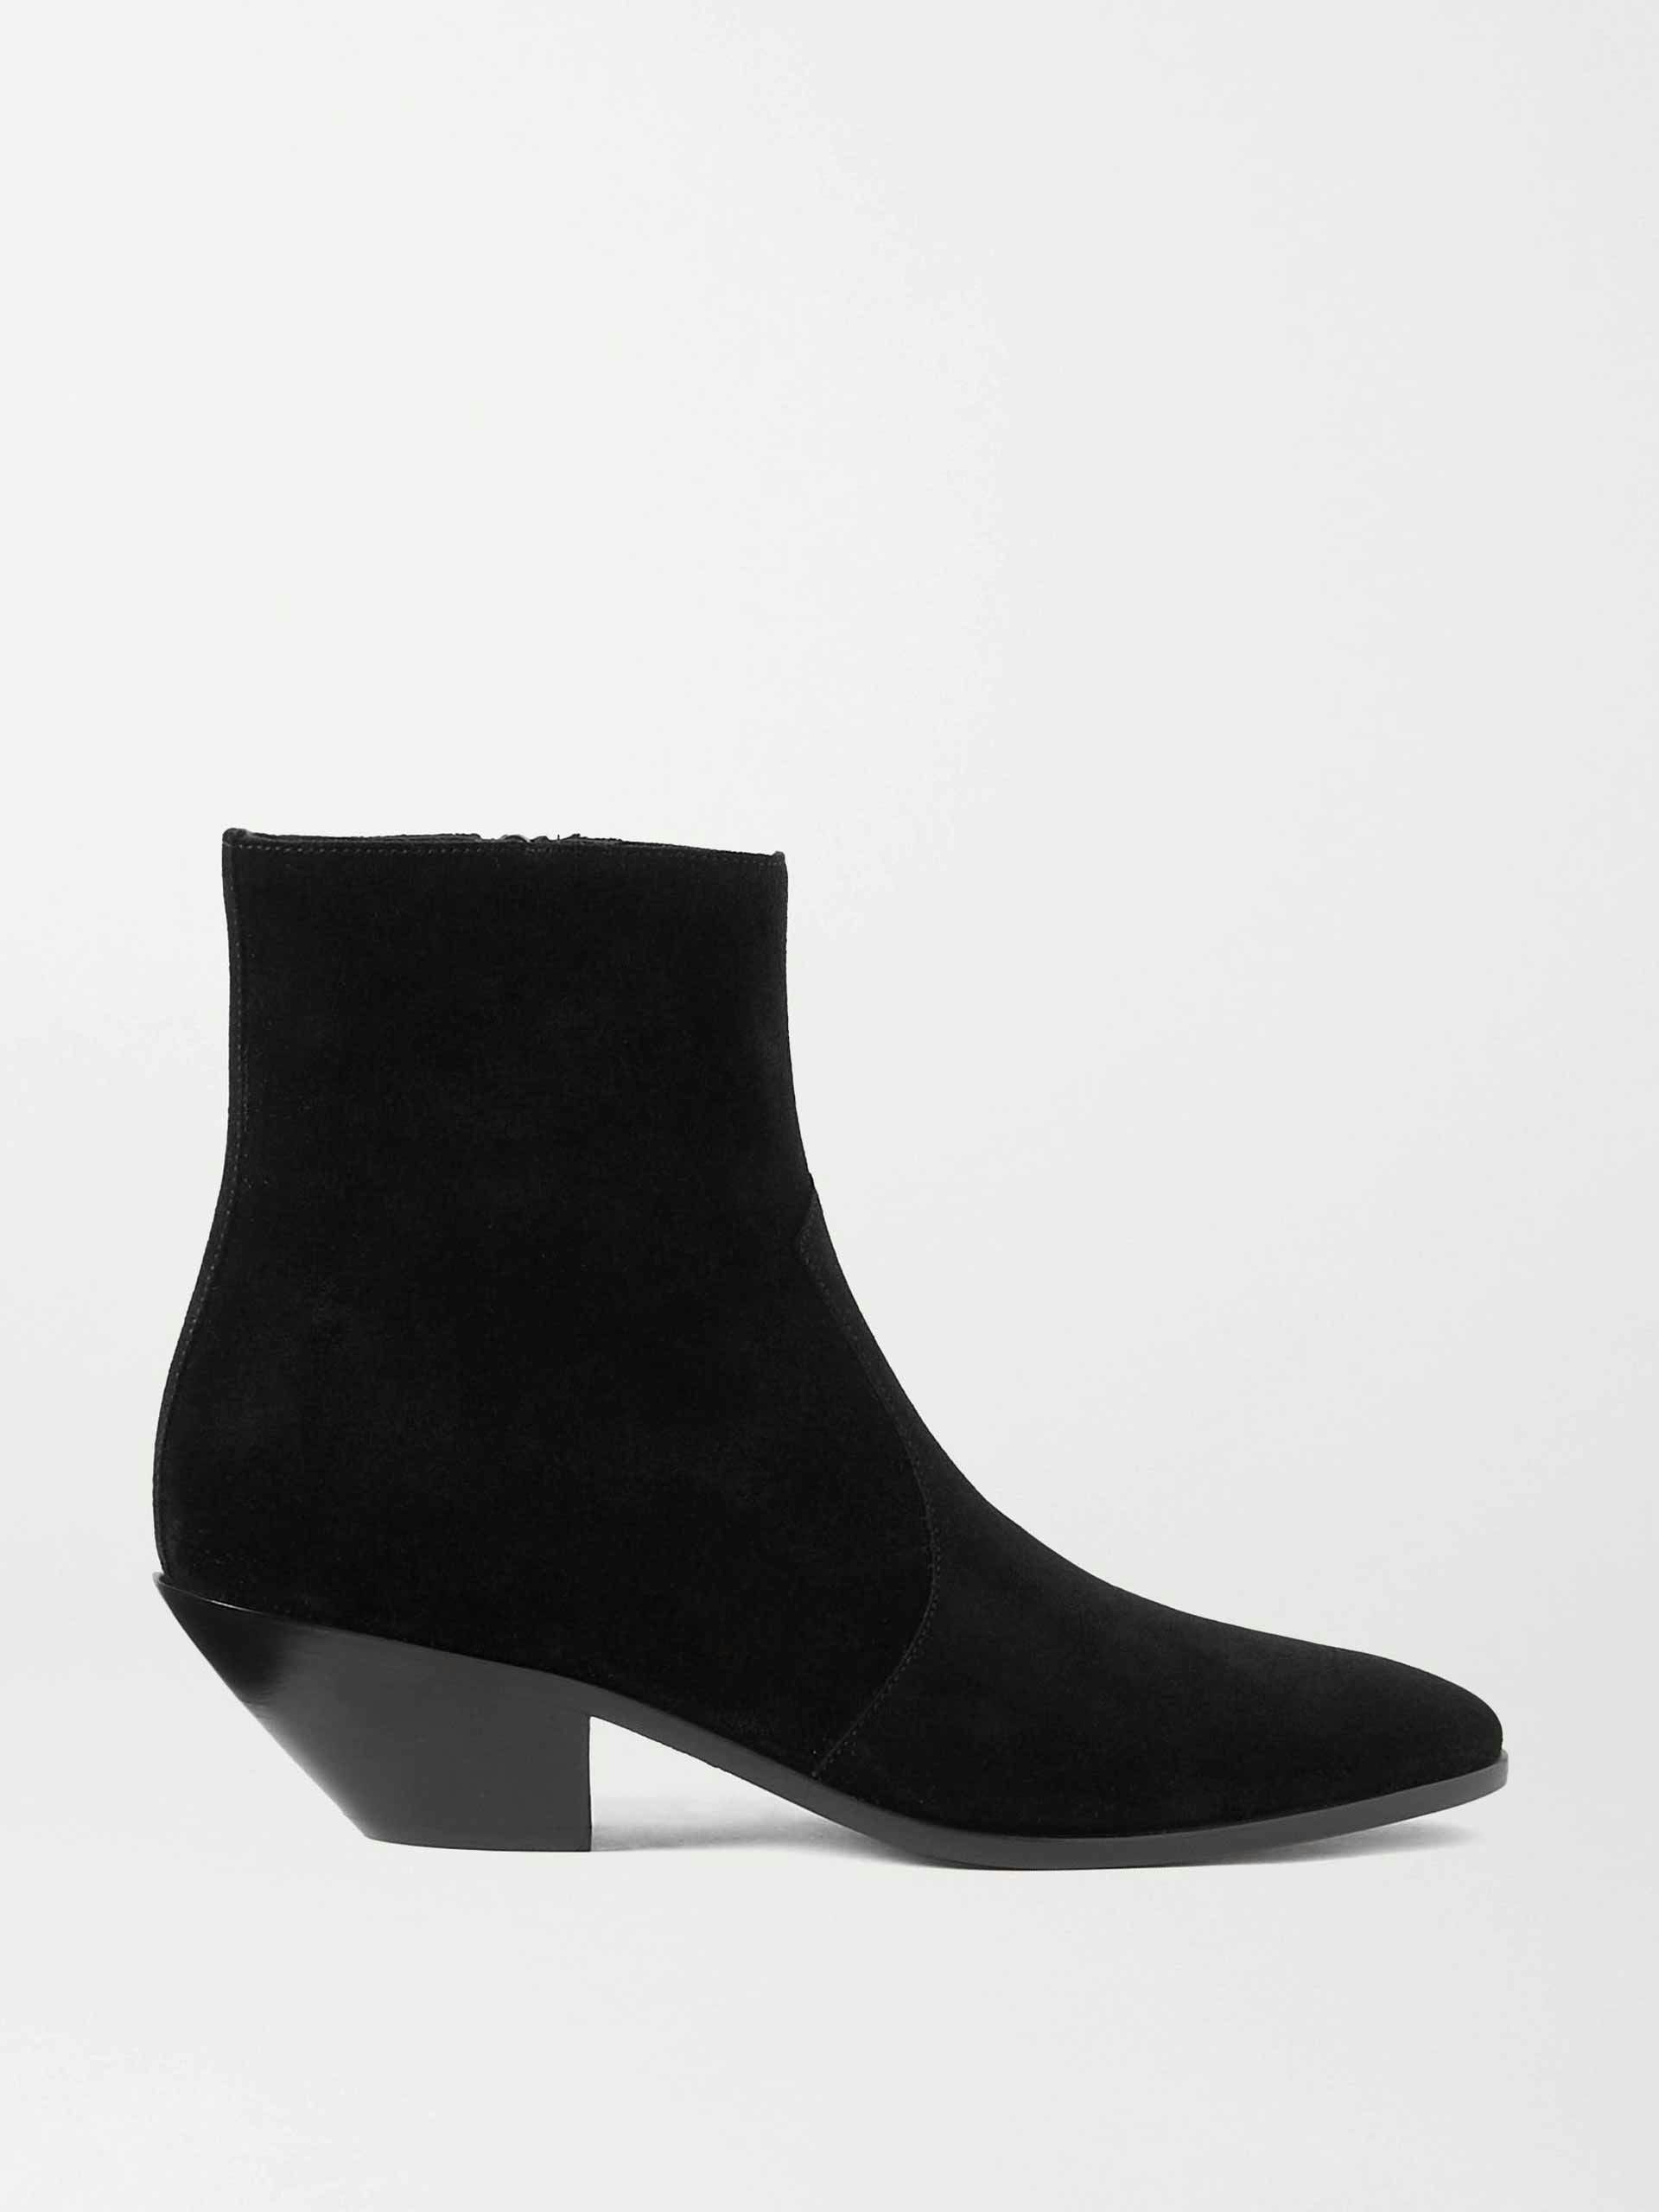 West suede ankle boots